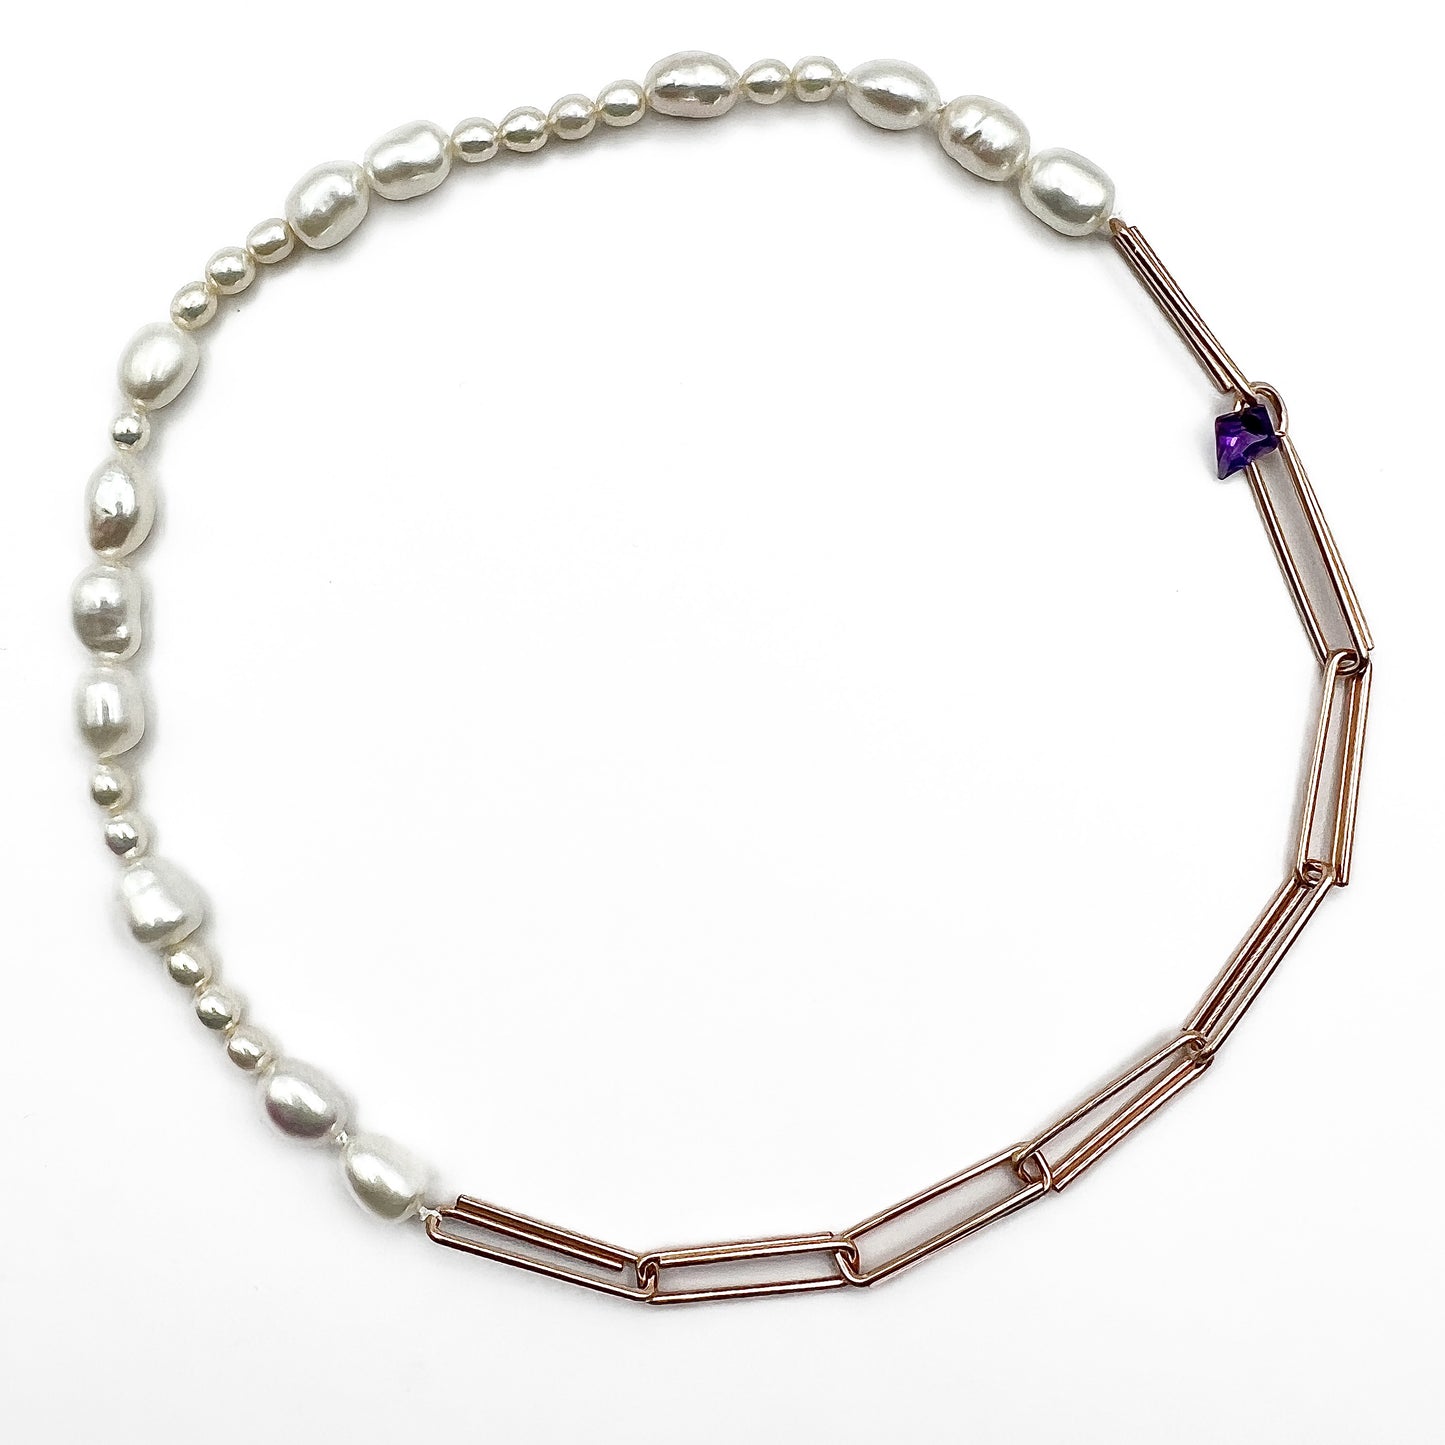 KITE AMETHYST AND PEARLS NECKLACE